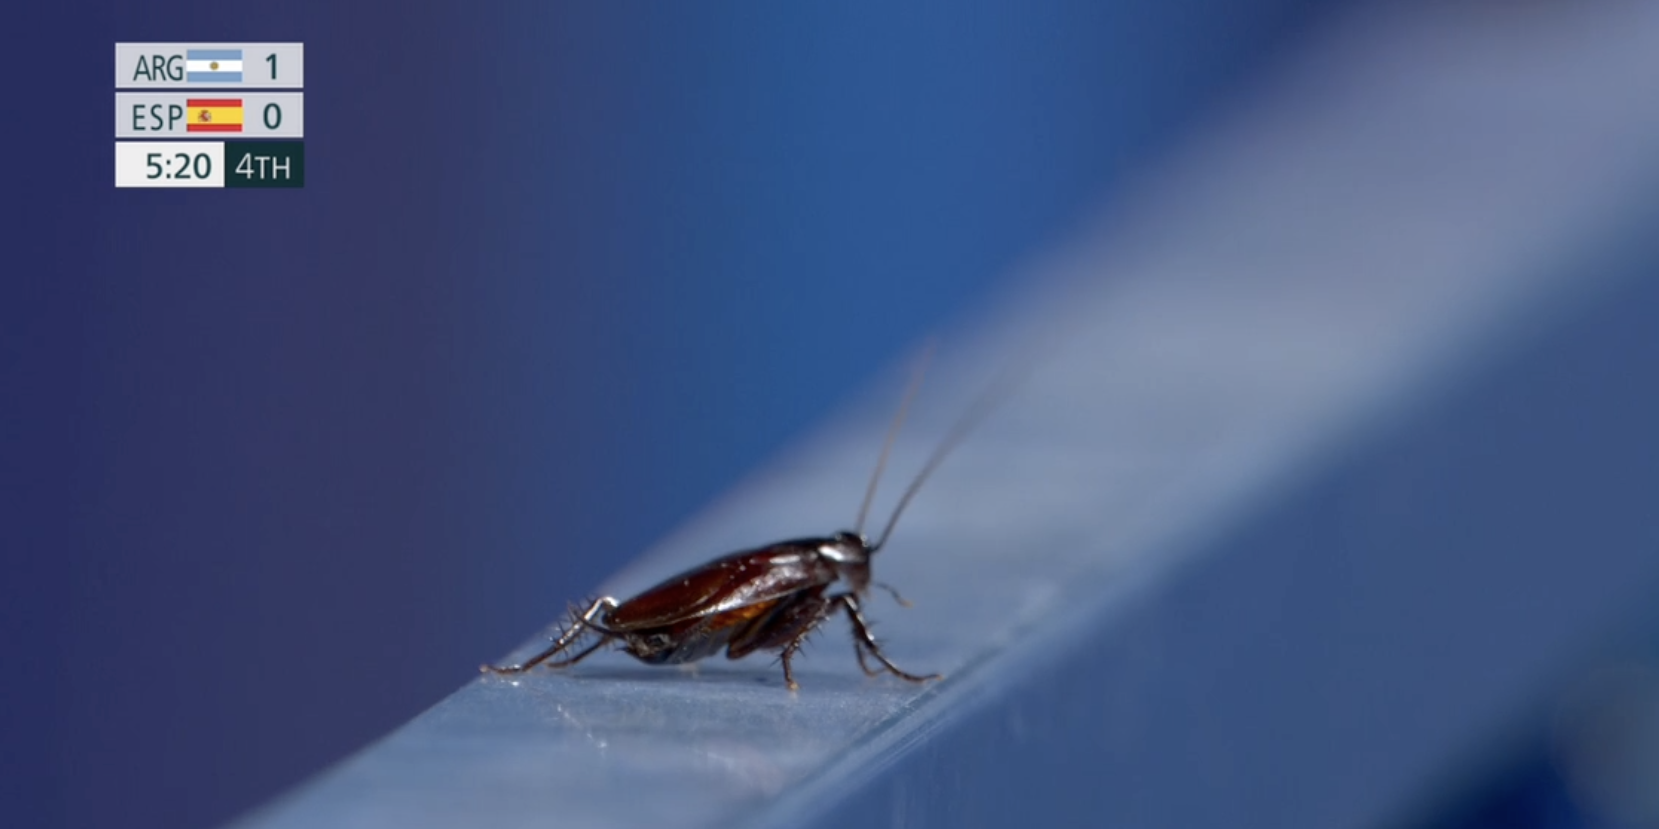 A cockroach is shown during an 2020 Tokyo Olympic broadcast